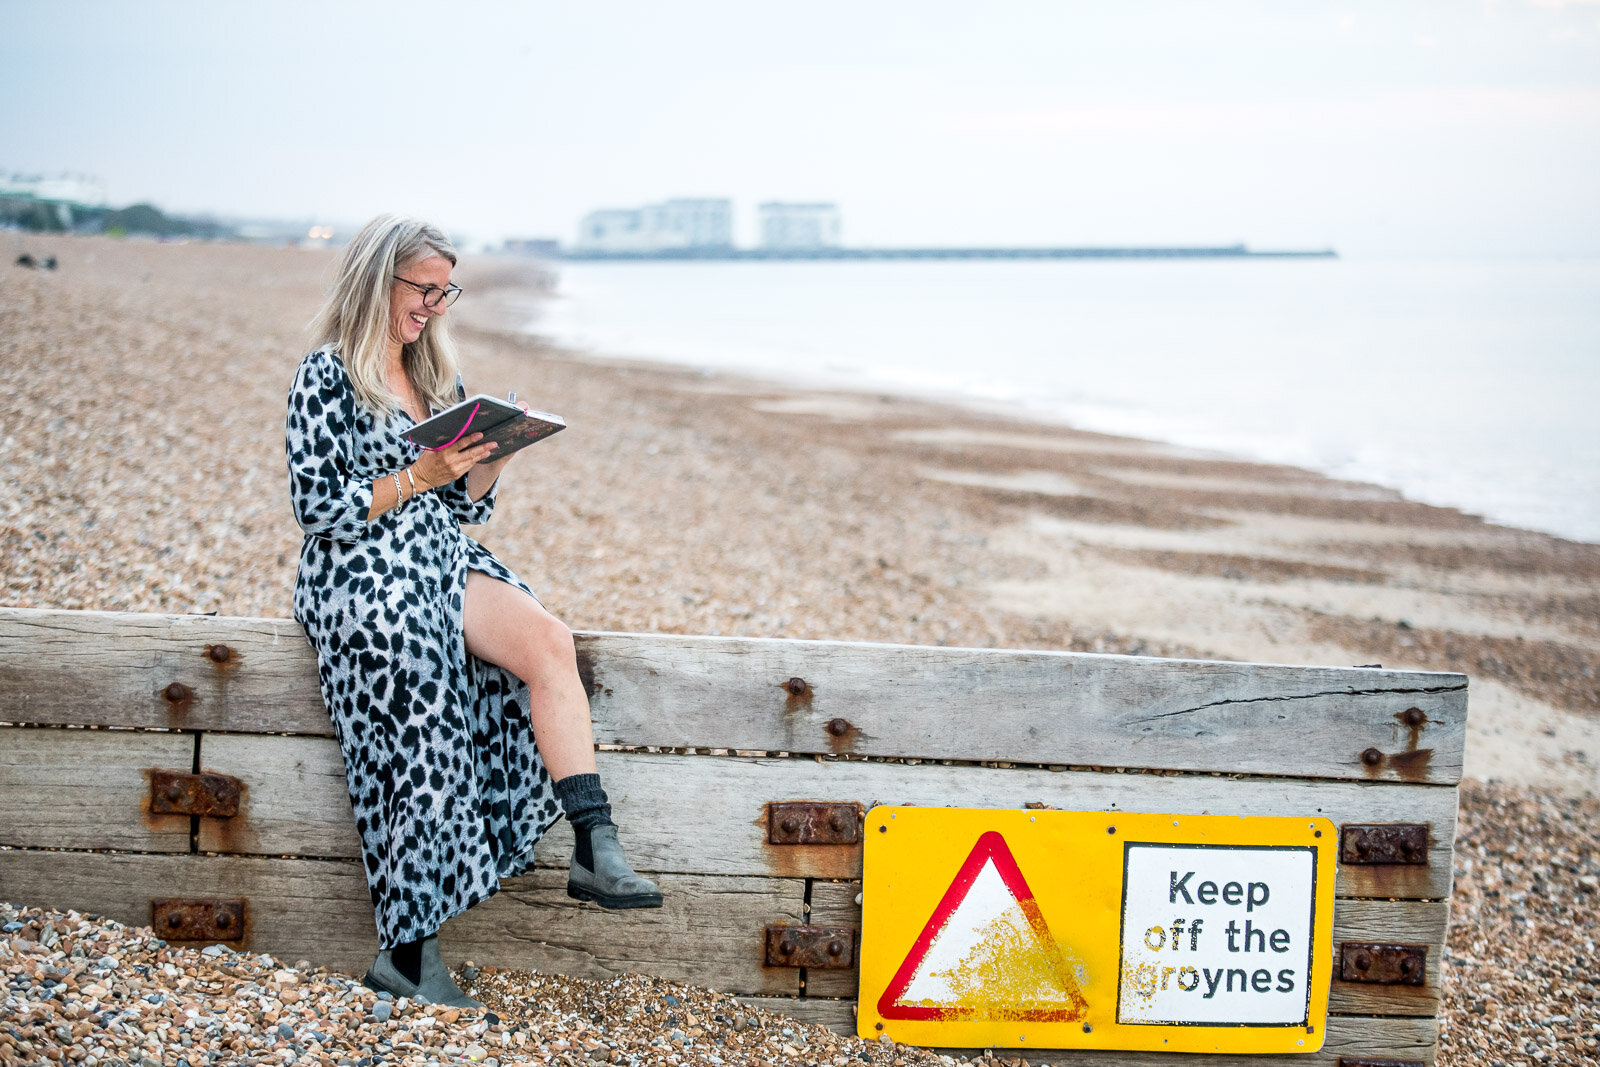 Free joyful authentic relax outdoor brand portrait photo session with Sussex London Brighton Hove photographer and videographer